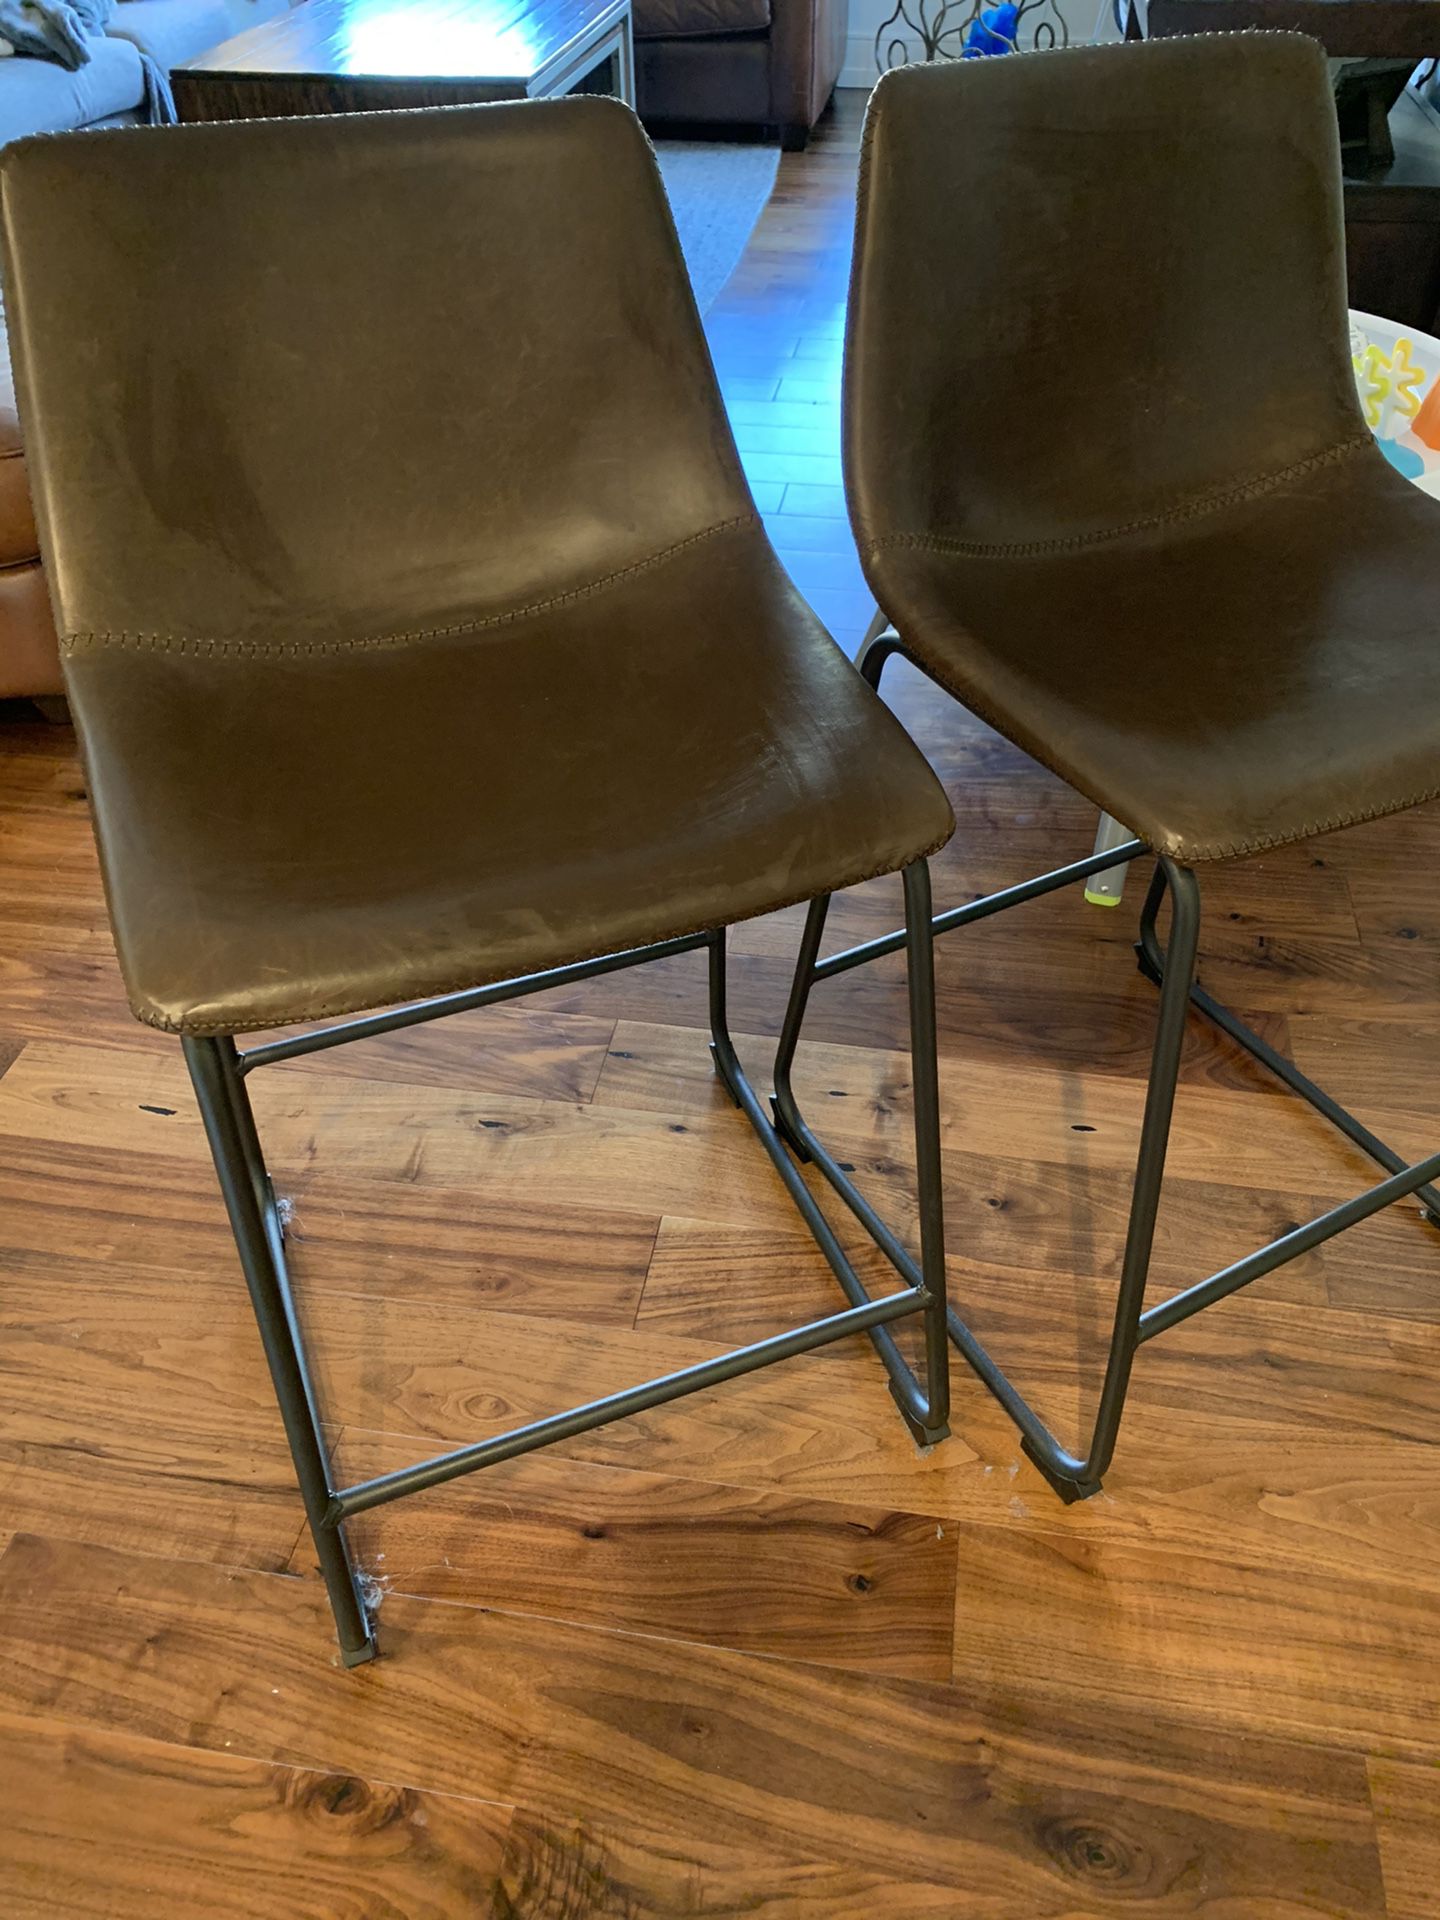 Two high stool chairs